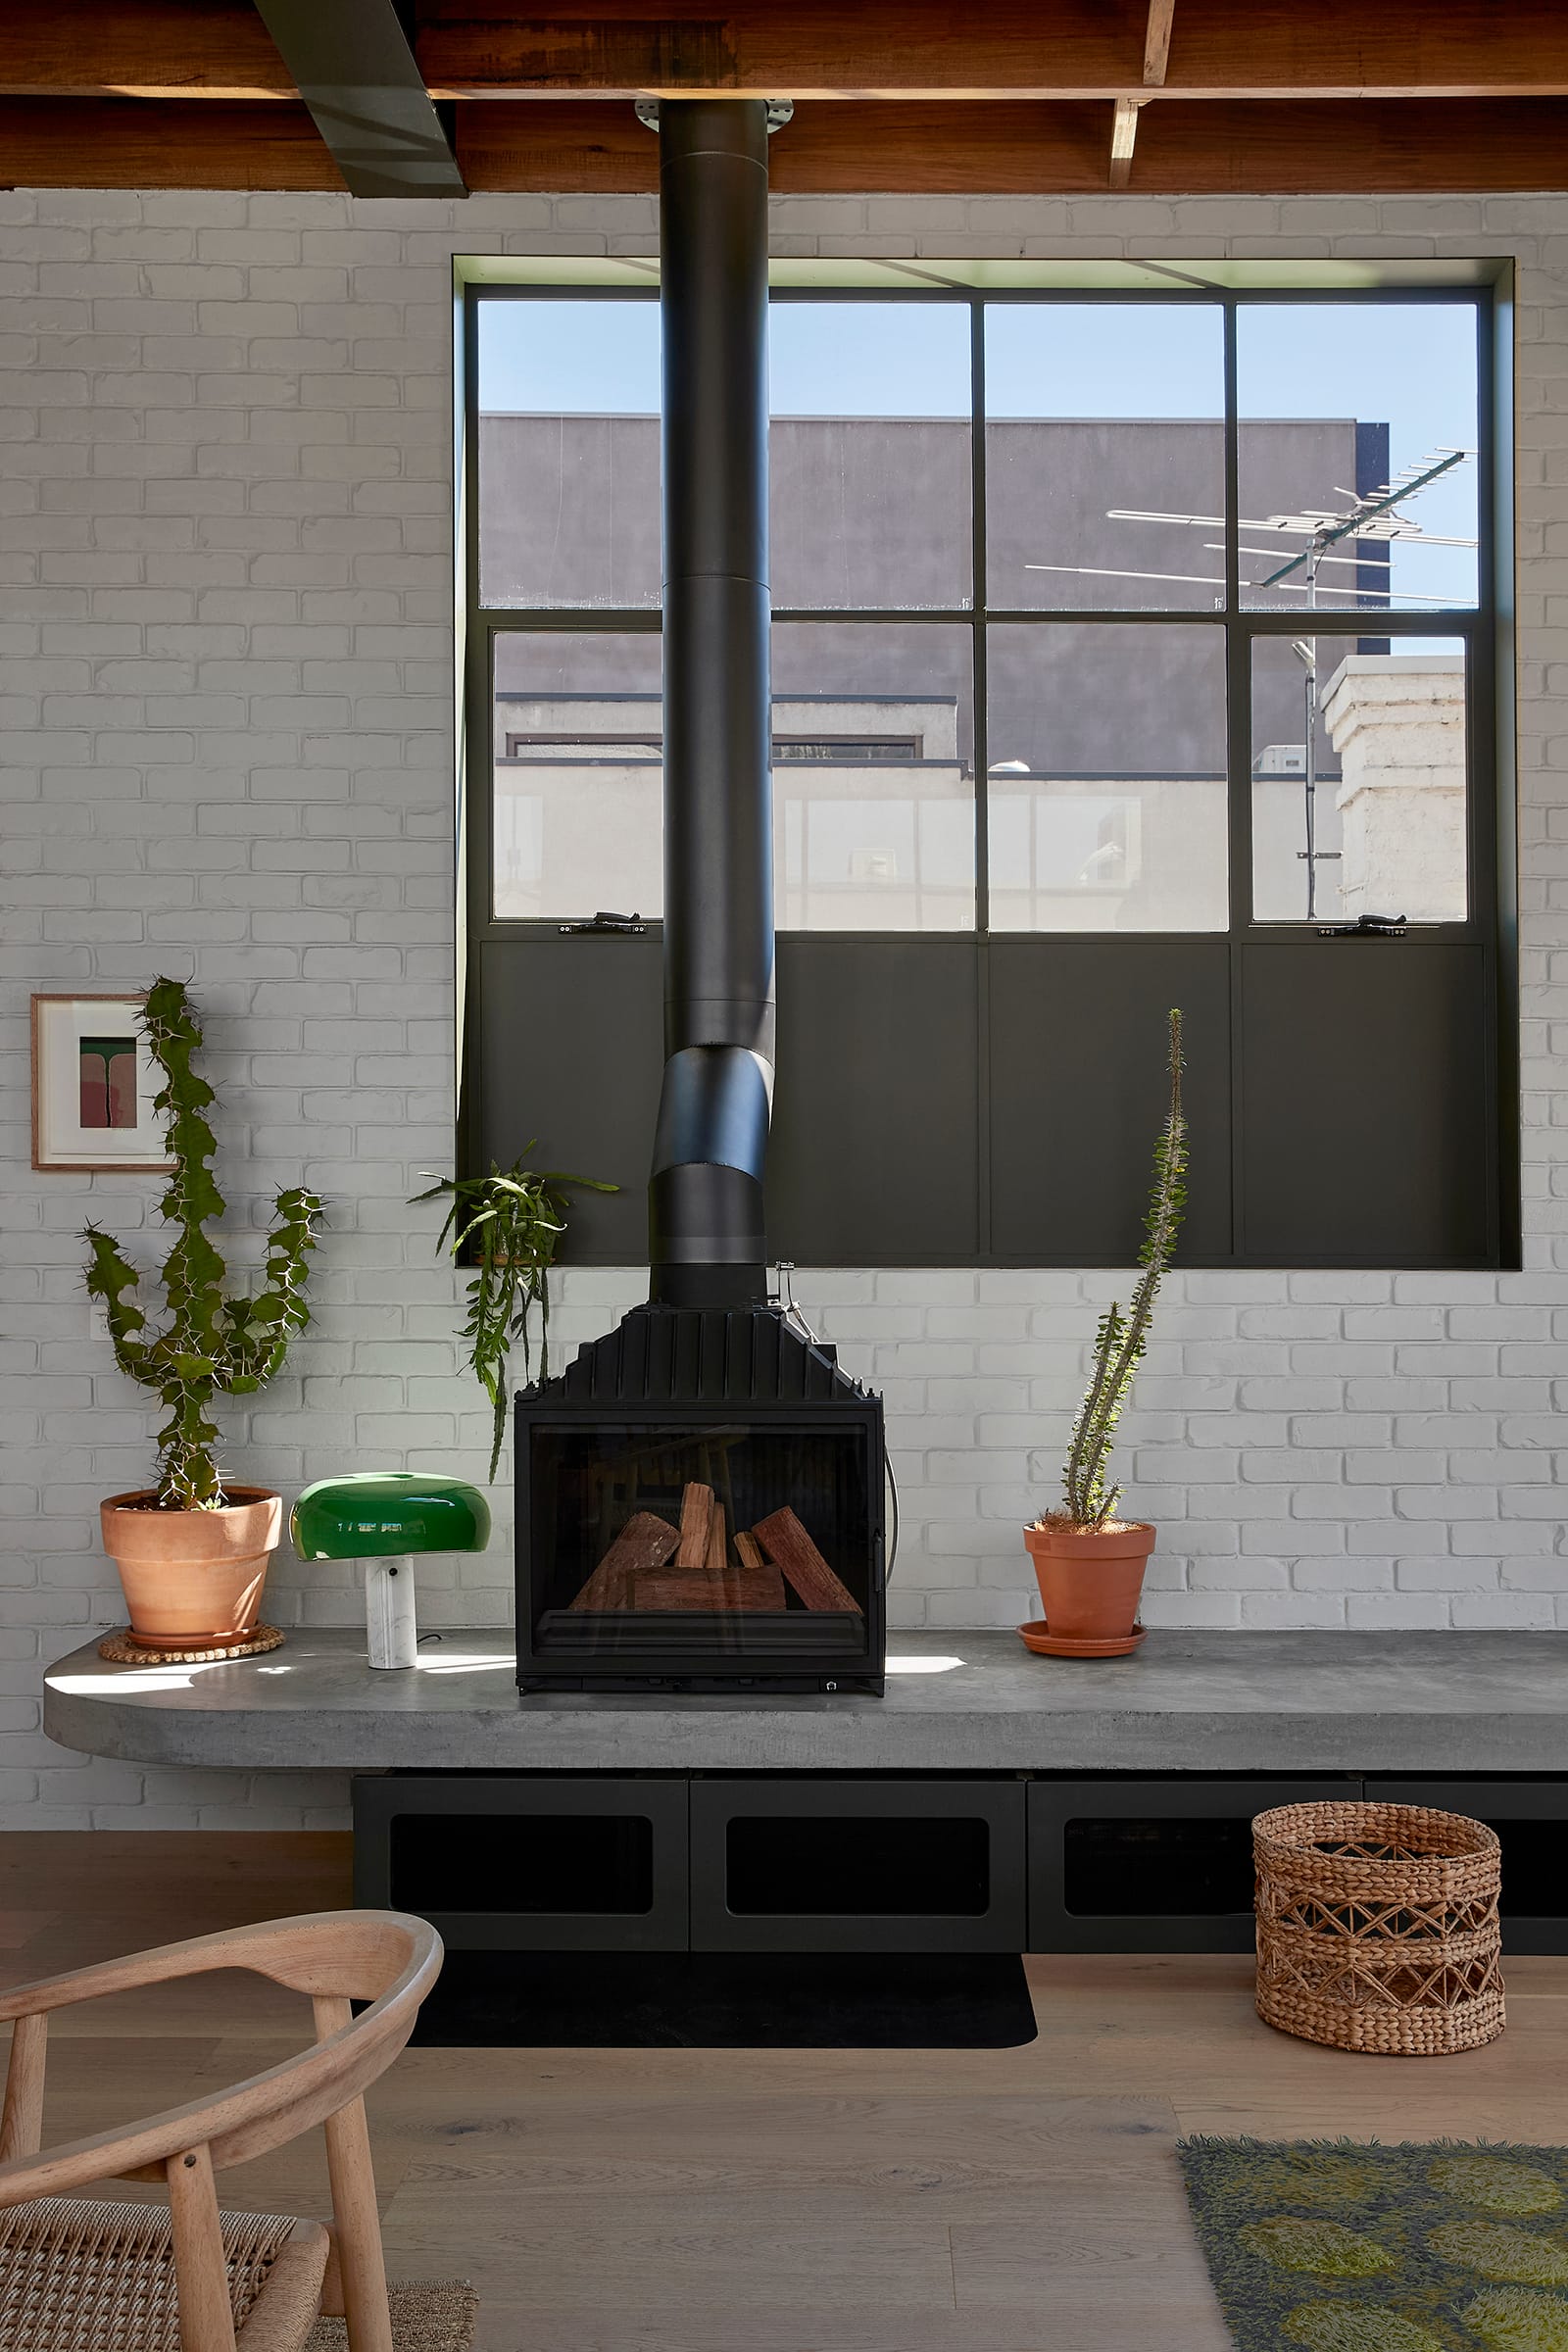 Fabrica by mcmahon and nerlich. Photography by Shannon McGrath. Black metal fireplace on floating concrete bench in front of white brick wall. Timber floors. Black metal grid framed window.